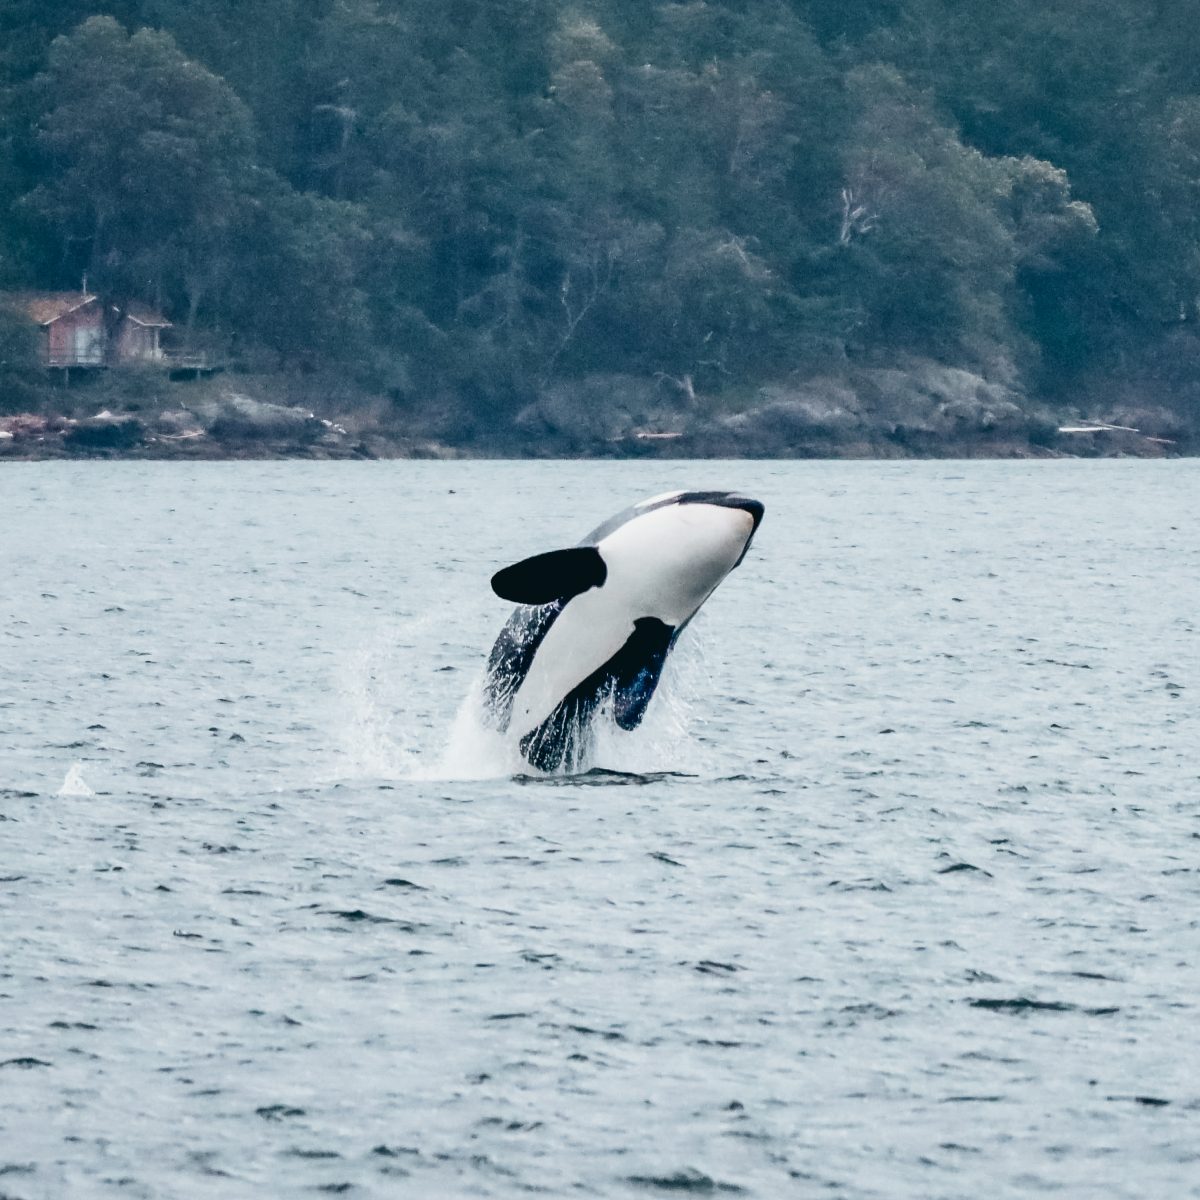 orca breaching or jumping out of the water